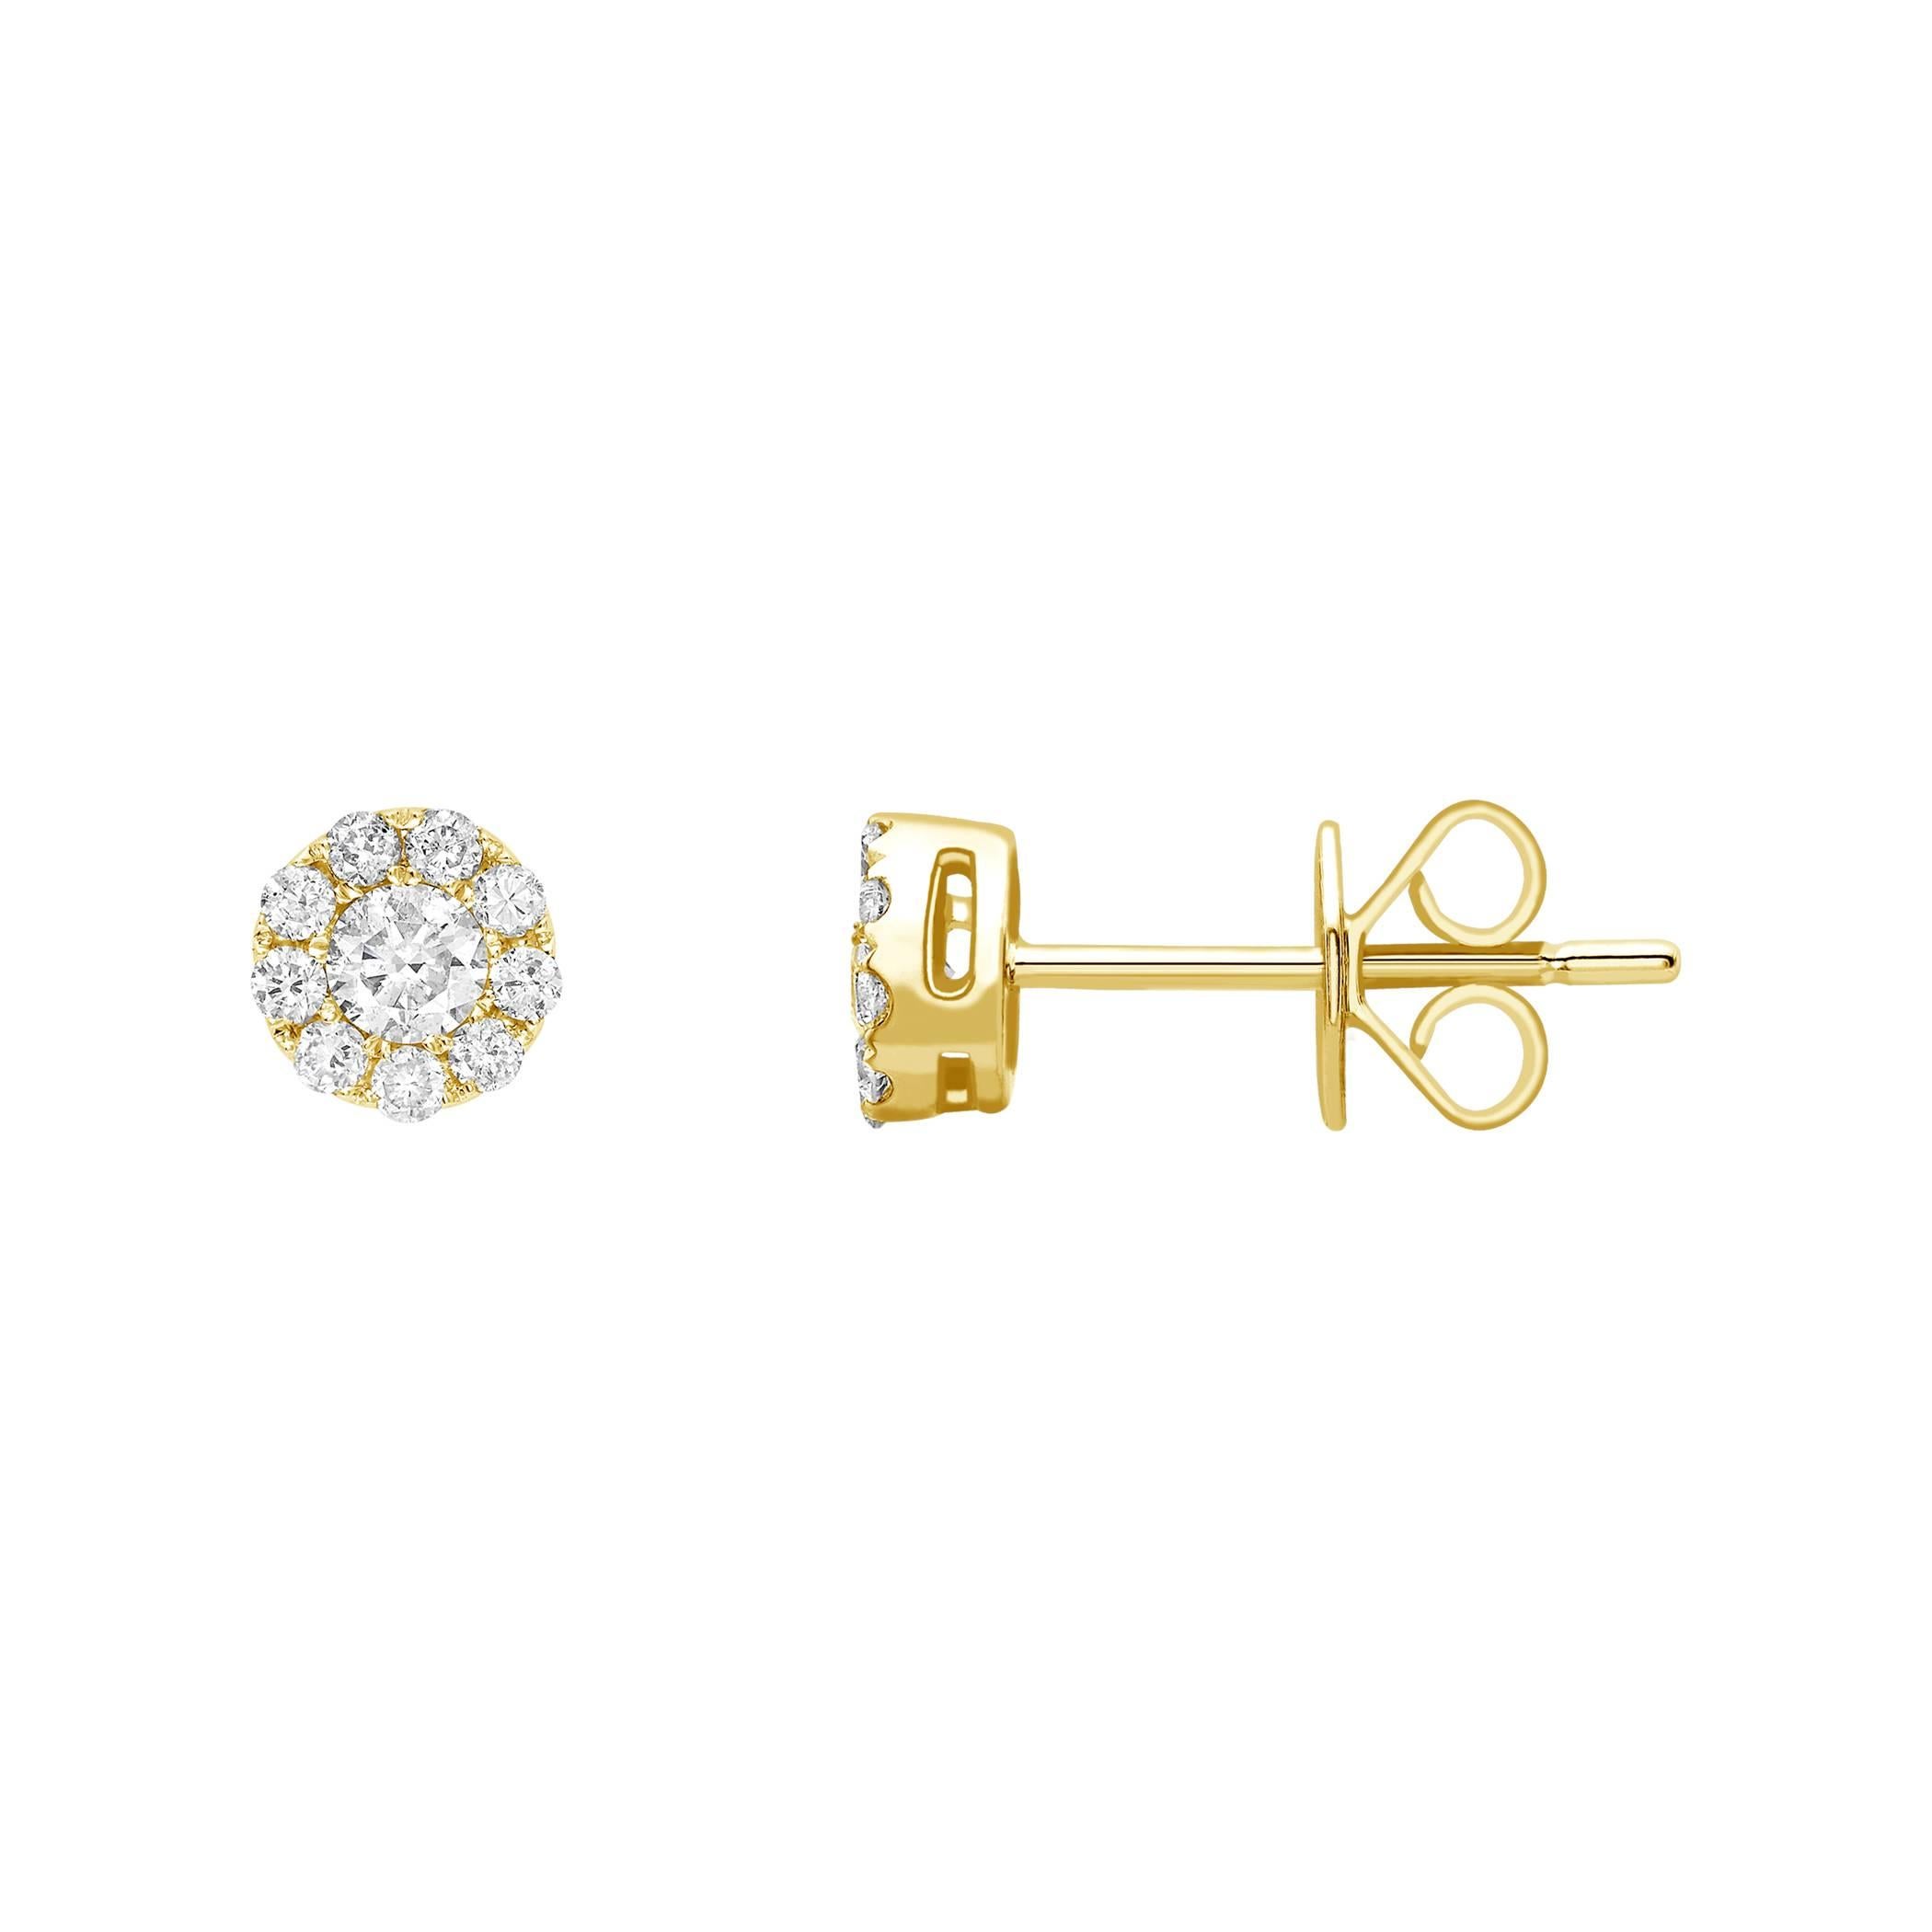 Details about   0.25 CT Round Diamond Beautiful Cluster Stud Womens Earrings 14K Yellow Gold GP 